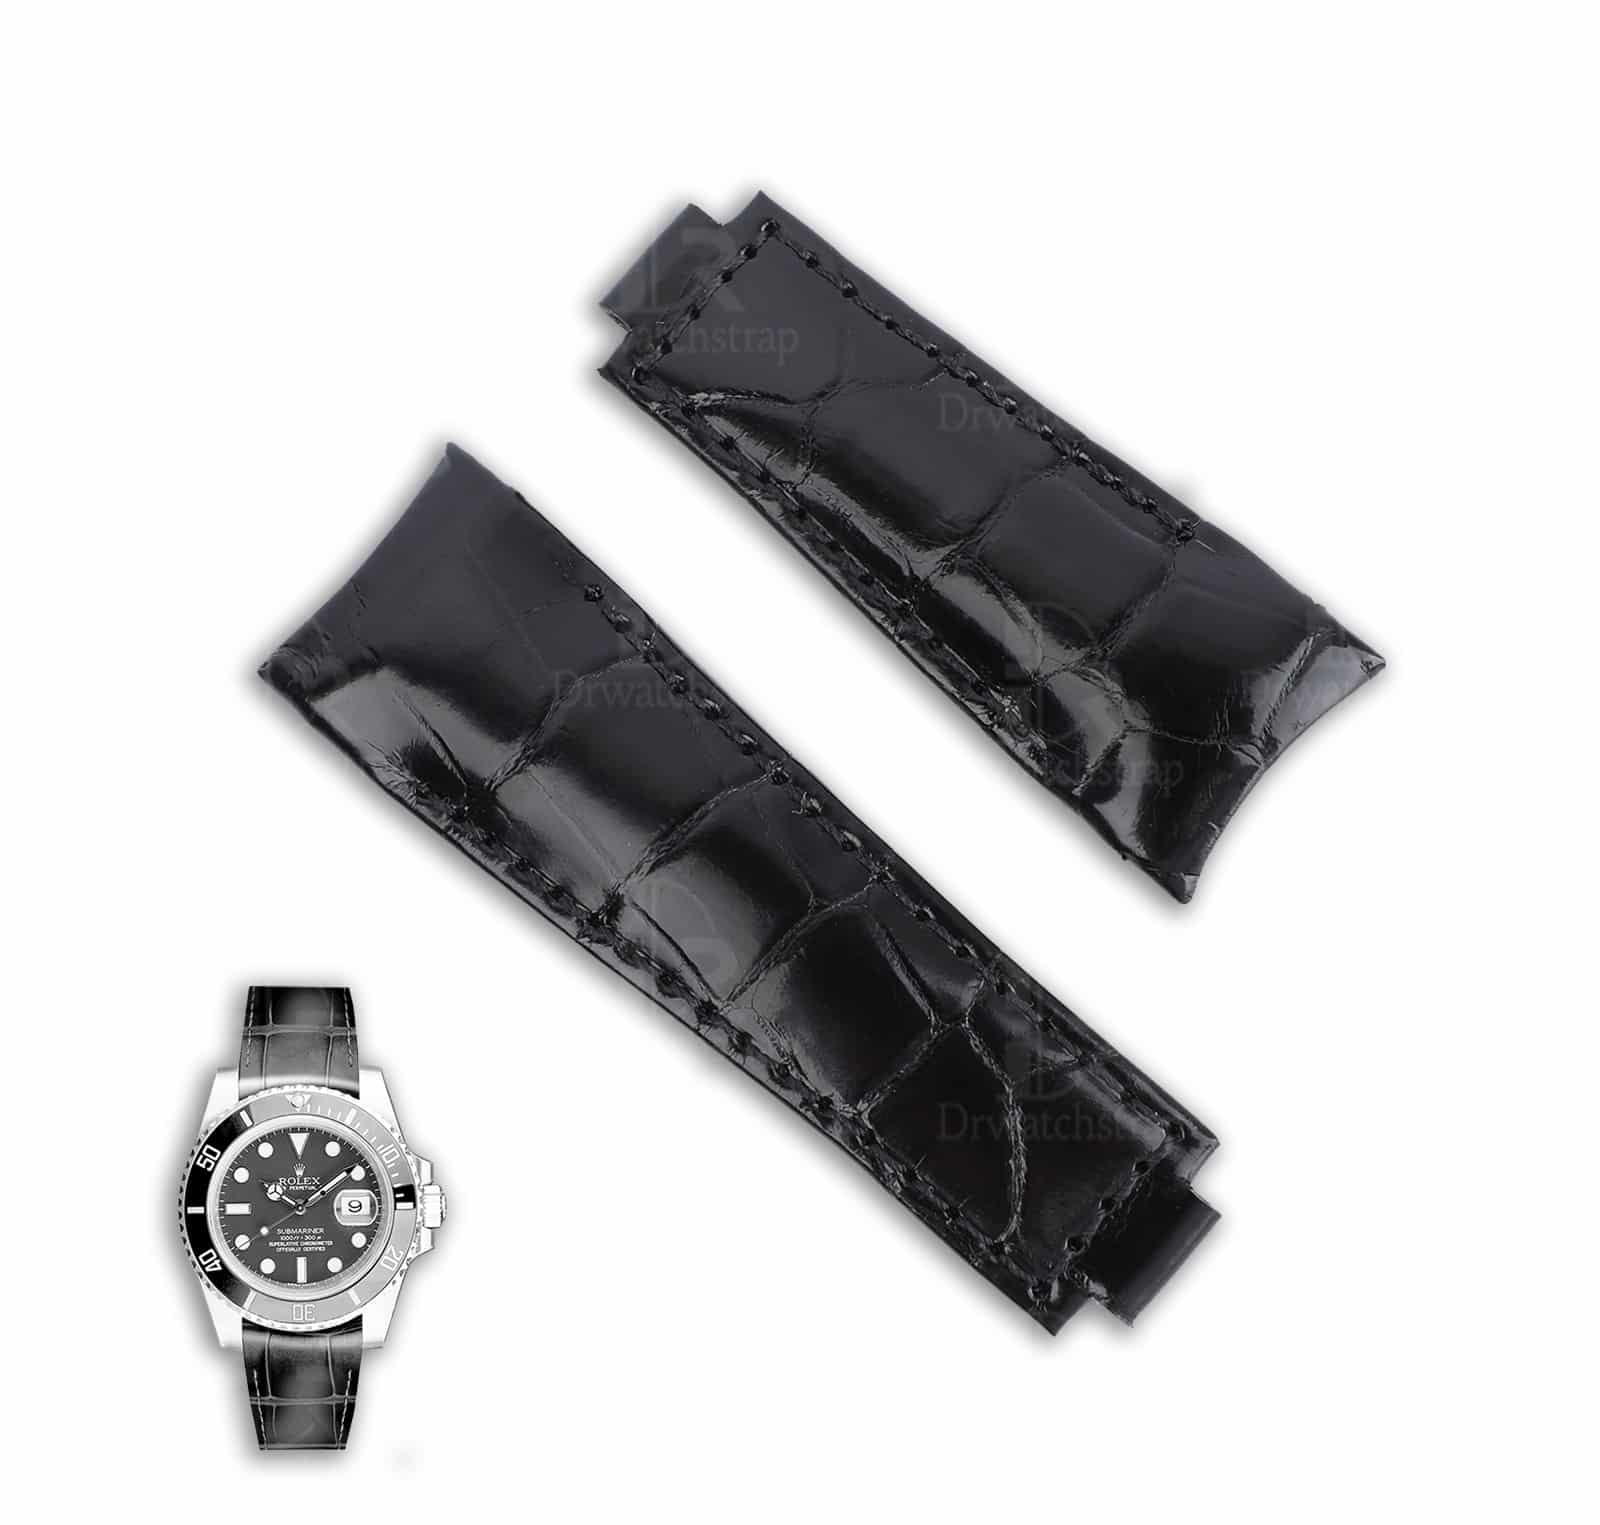 Best quality genuine OEM handmade aftermarket black Curved End link alligator crocodile belly-scale high-end replacement Rolex Submariner black leather watch strap and watch band for sale - Shop the high-end custom Alligator straps and watch bands 20mm at a low price